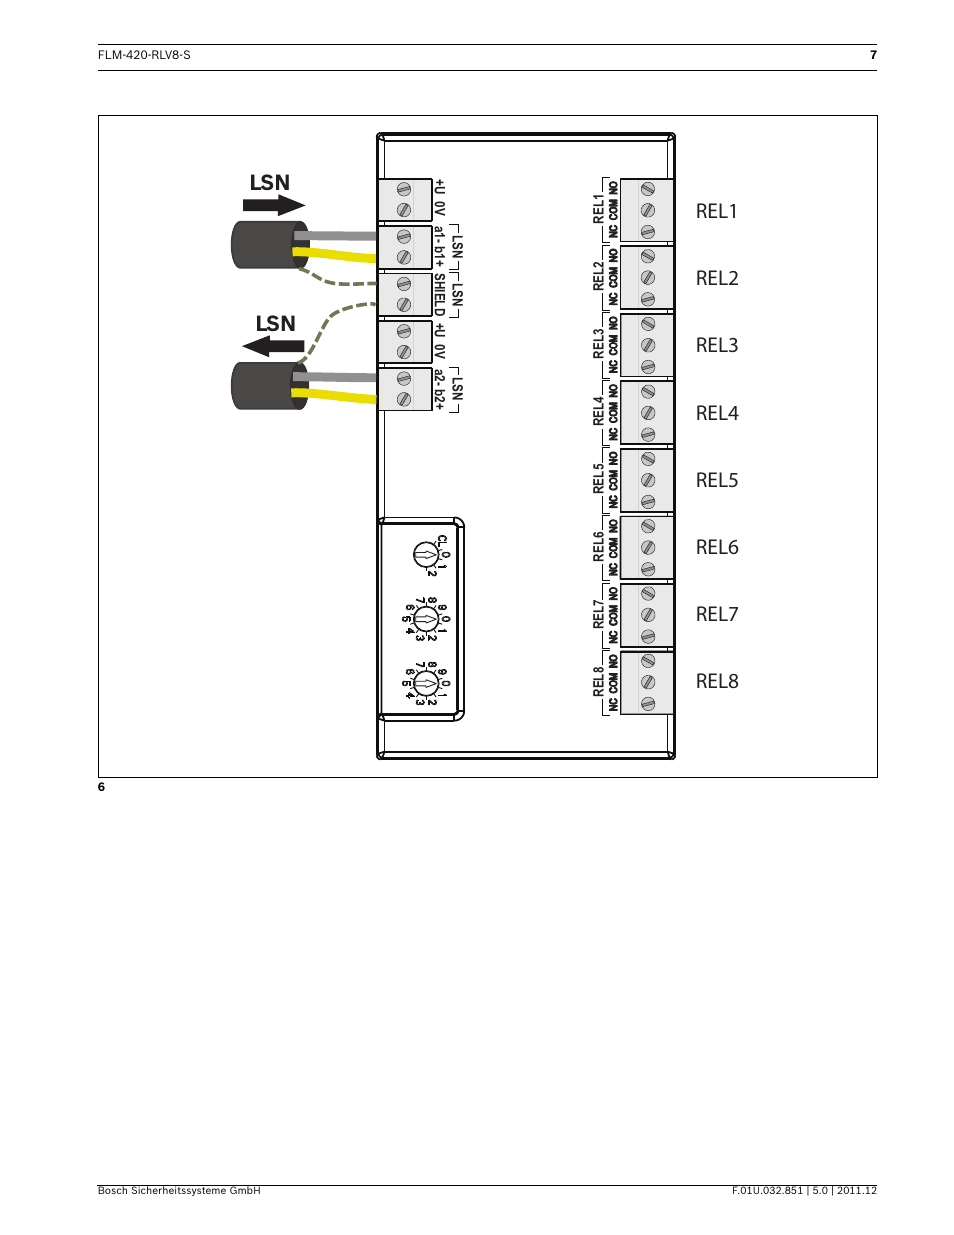 Bosch FLM-420-RLV8-S Octo-relay Interface Module Low Voltage User Manual |  Page 7 / 24